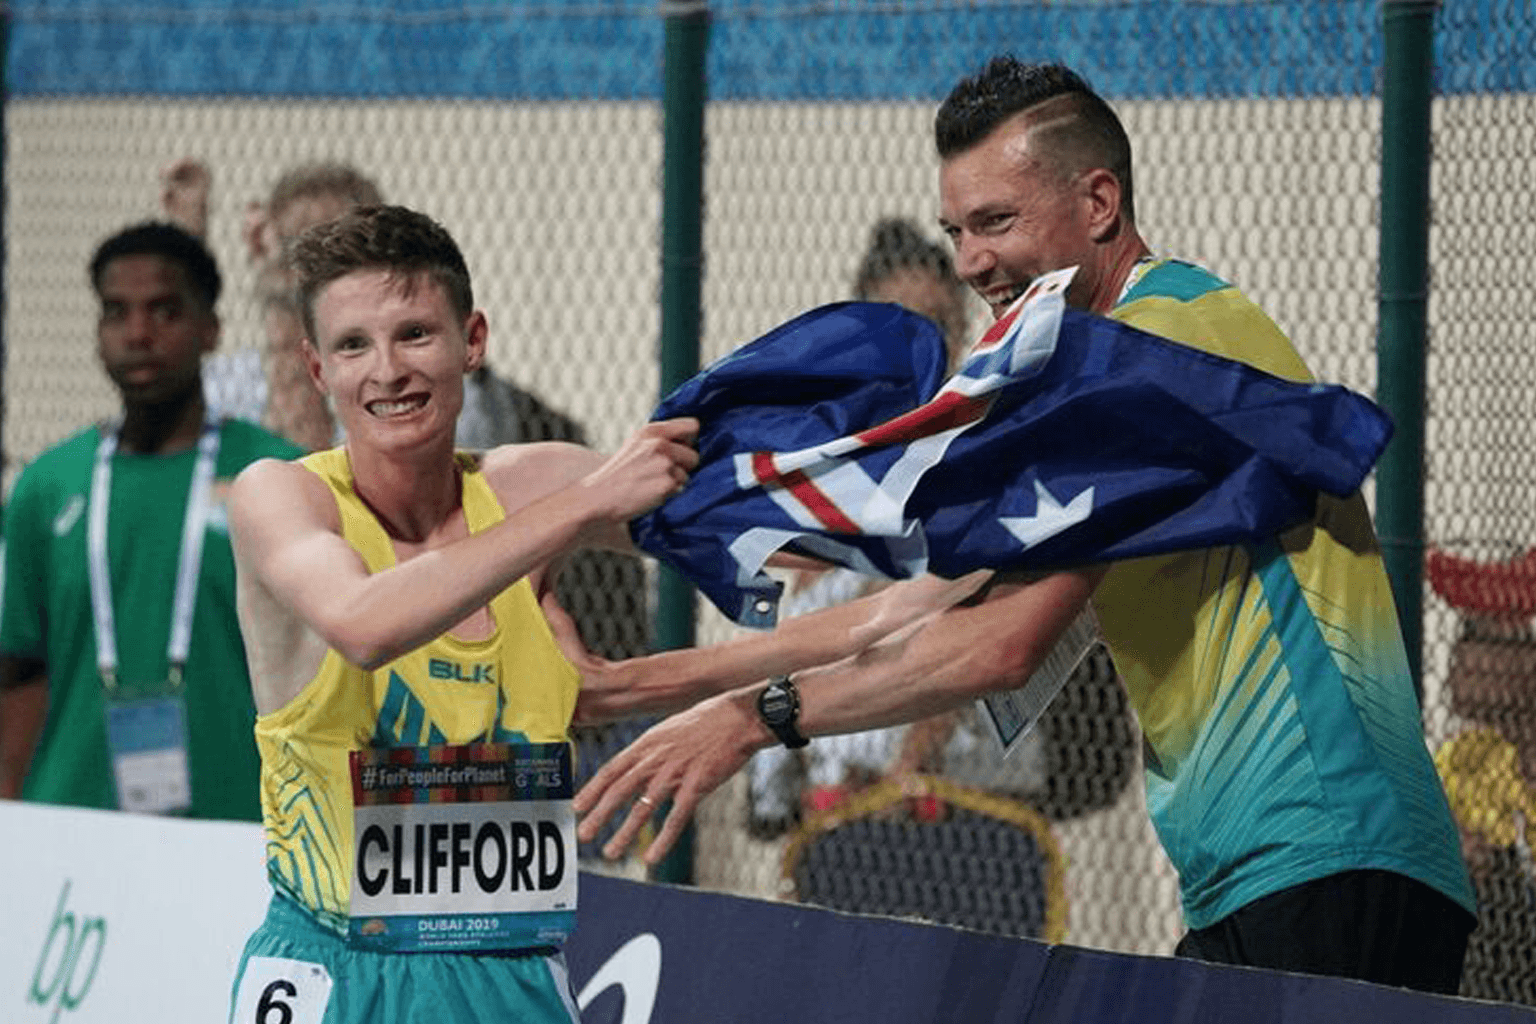 Jaryd Clifford wears a racing bib and waves an Australian flag with coach Philo Saunders